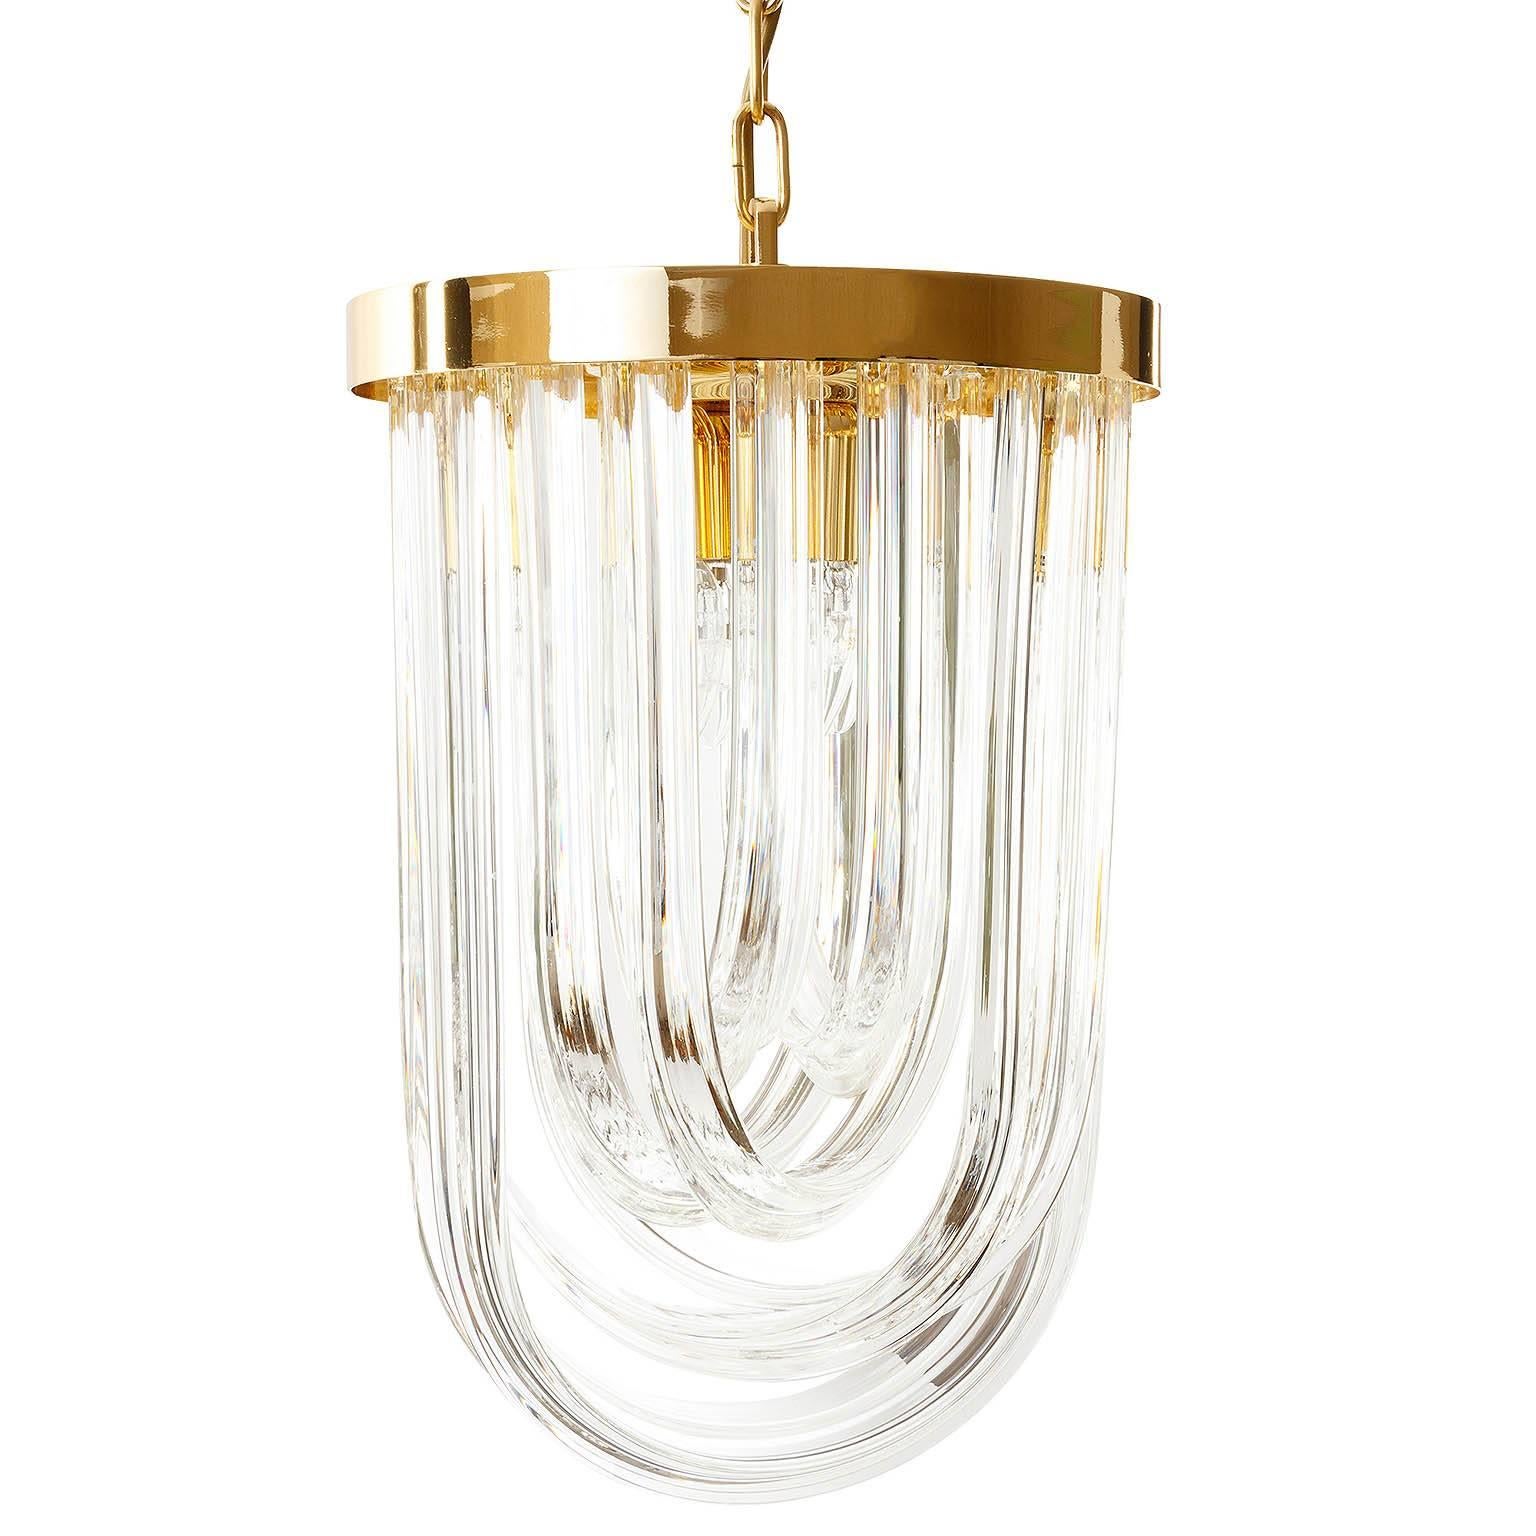 Mid-Century Modern Venini Pendant Light Chandelier, Curved Crystal Glass and Gilt Brass, Italy For Sale